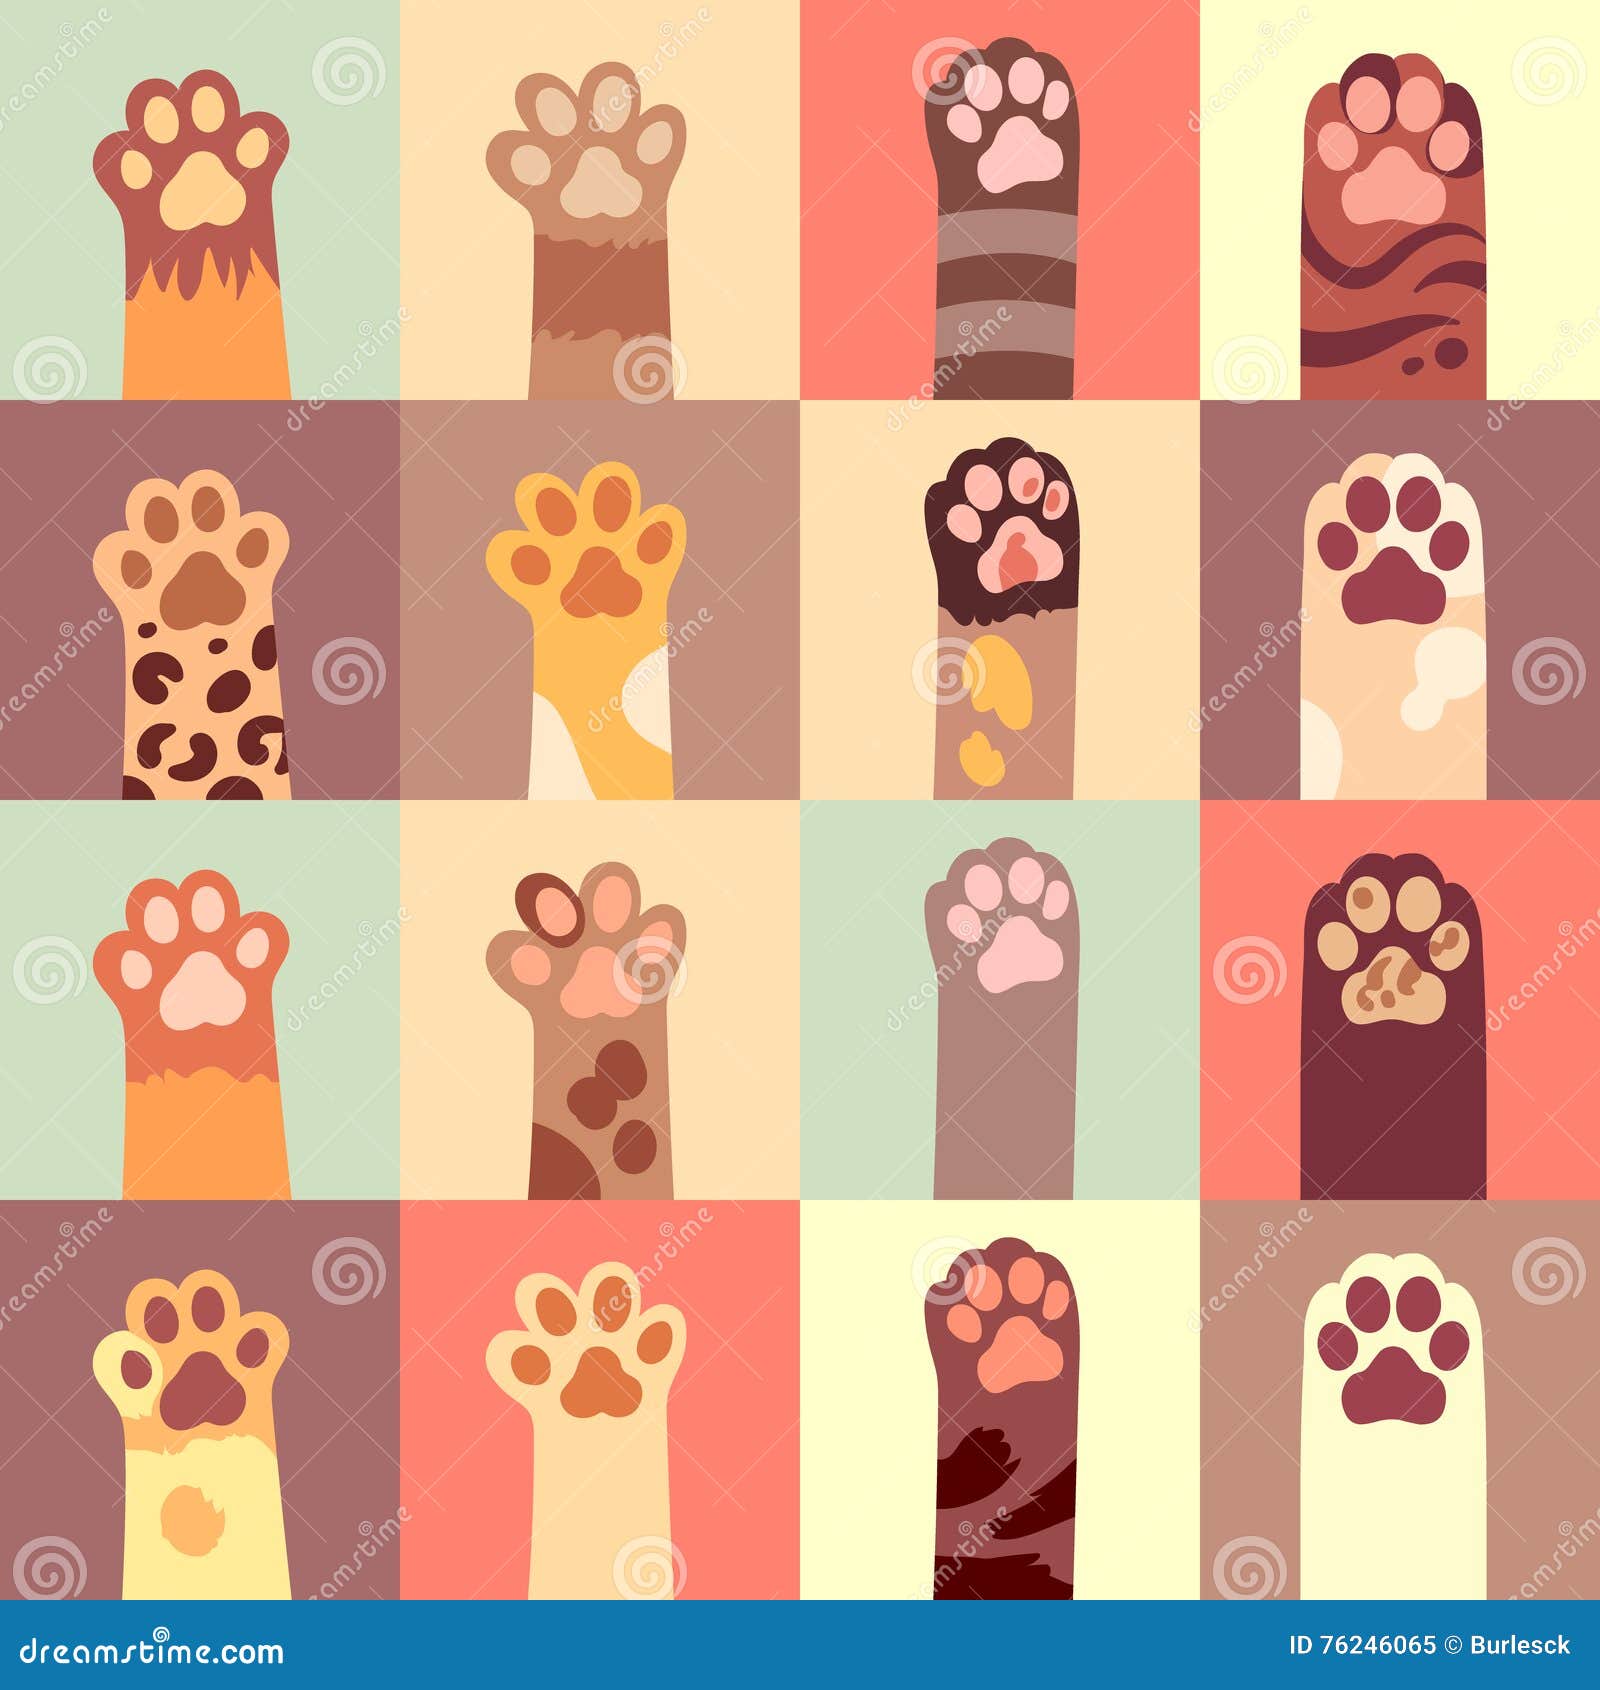 Cats Paw Vector Flat Set Stock Vector Illustration of color, print: 76246065